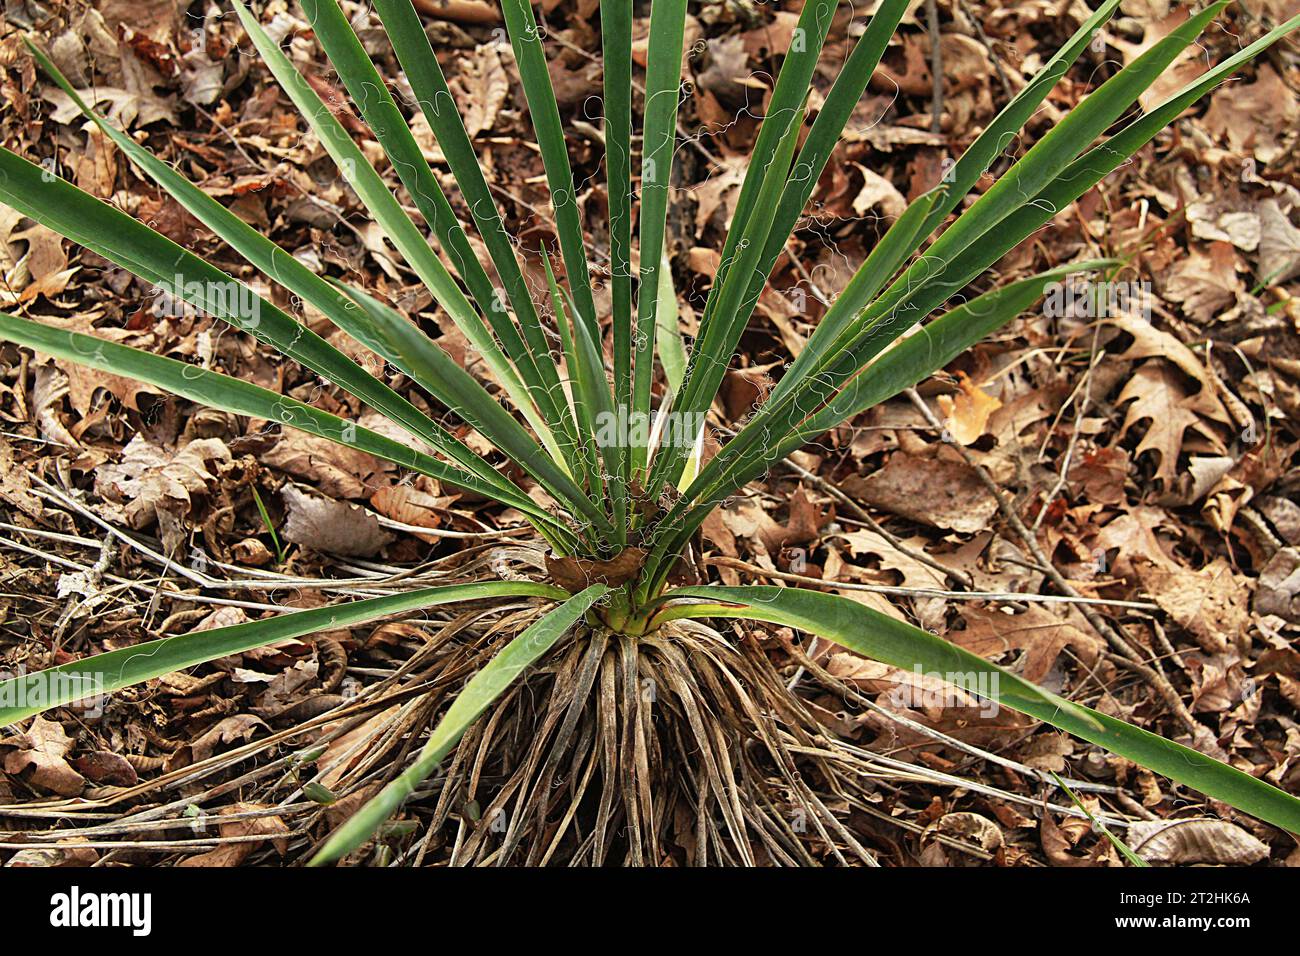 A Yucca plant growing in the woods in Virginia, USA Stock Photo